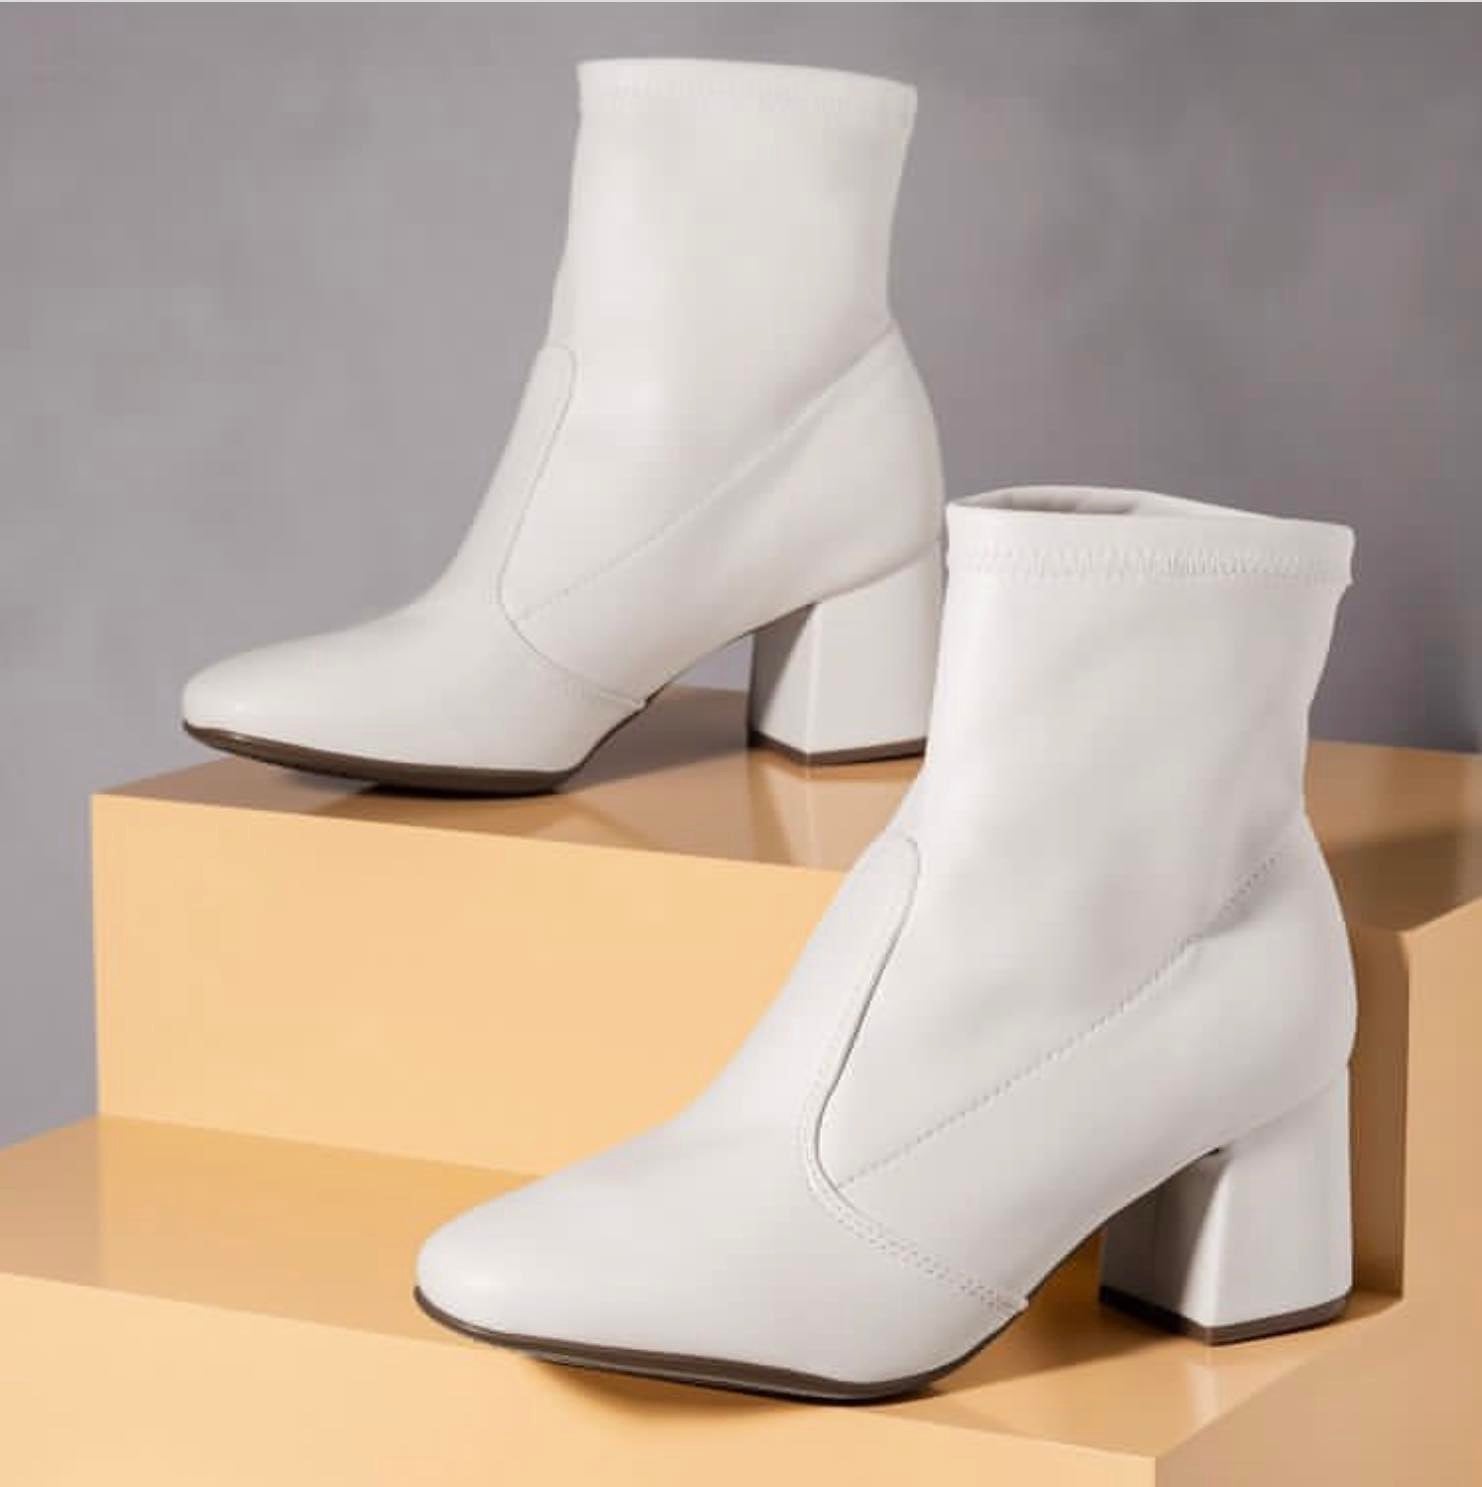 Beira Rio 9076-100 Block Heel Ankle Boot in White Napa Stretch